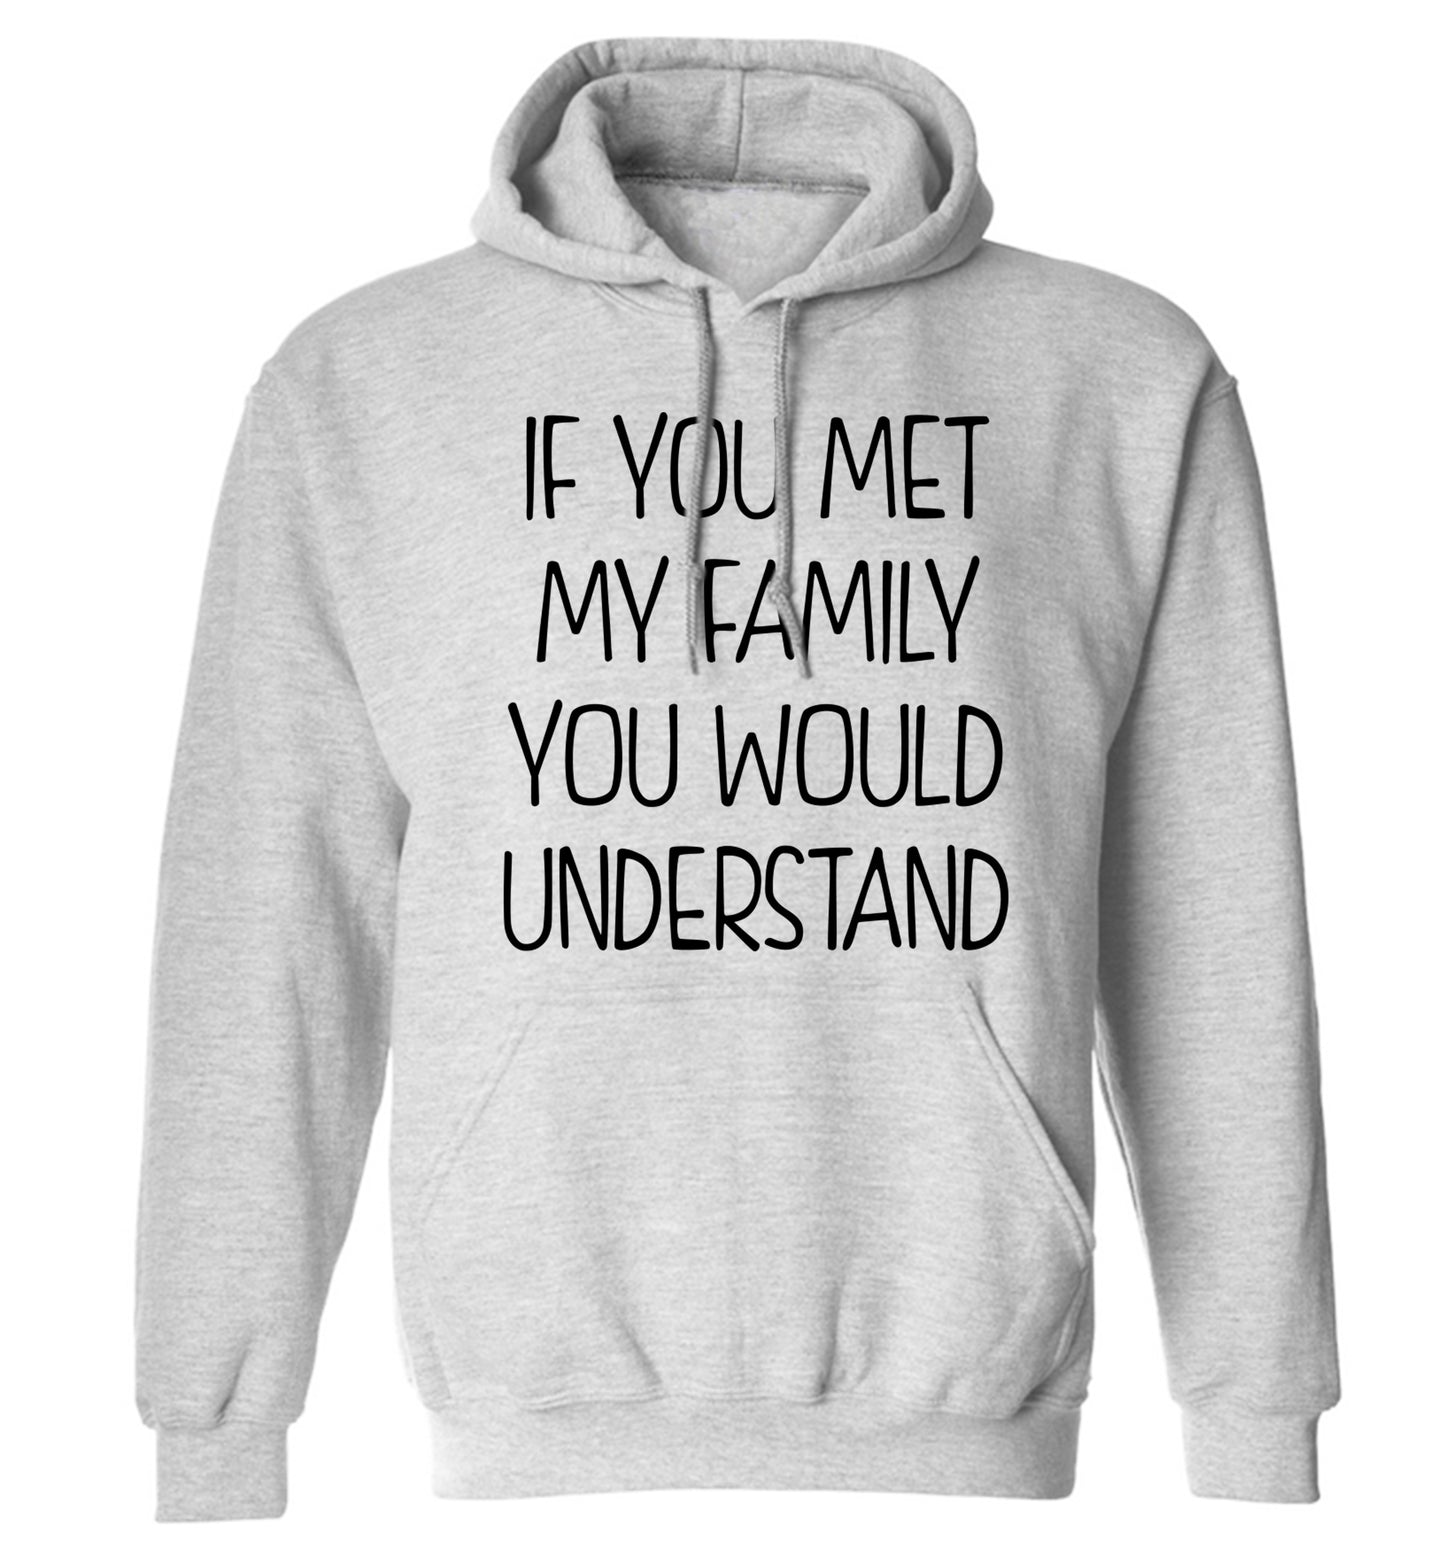 If you met my family you would understand adults unisex grey hoodie 2XL